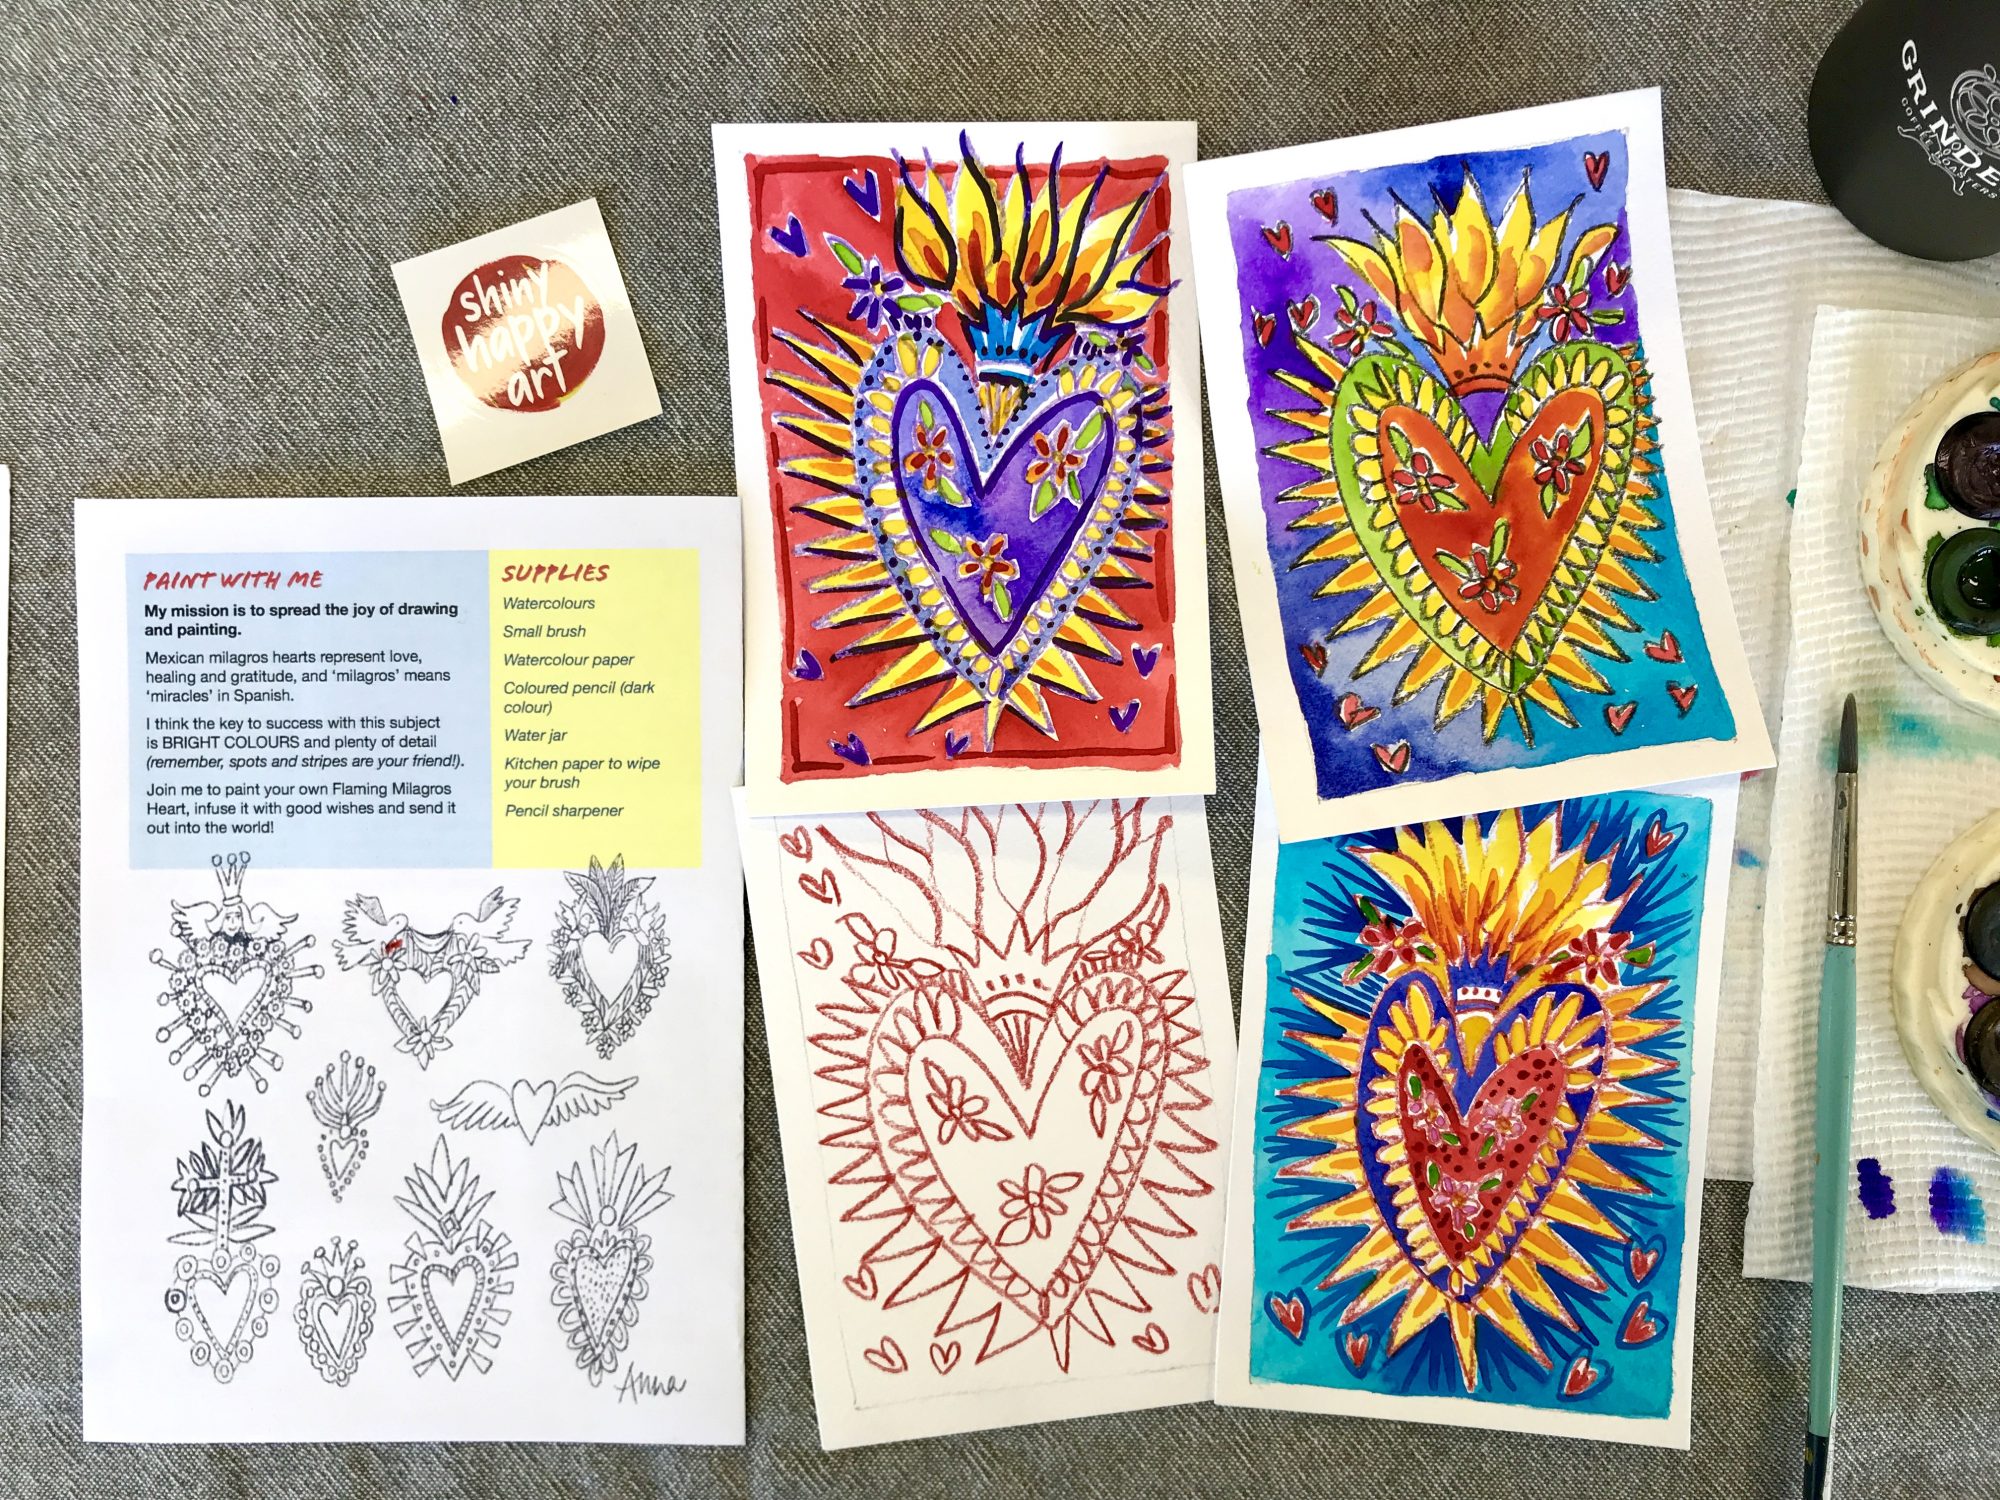 You can paint your flaming heart cards in lots of ways